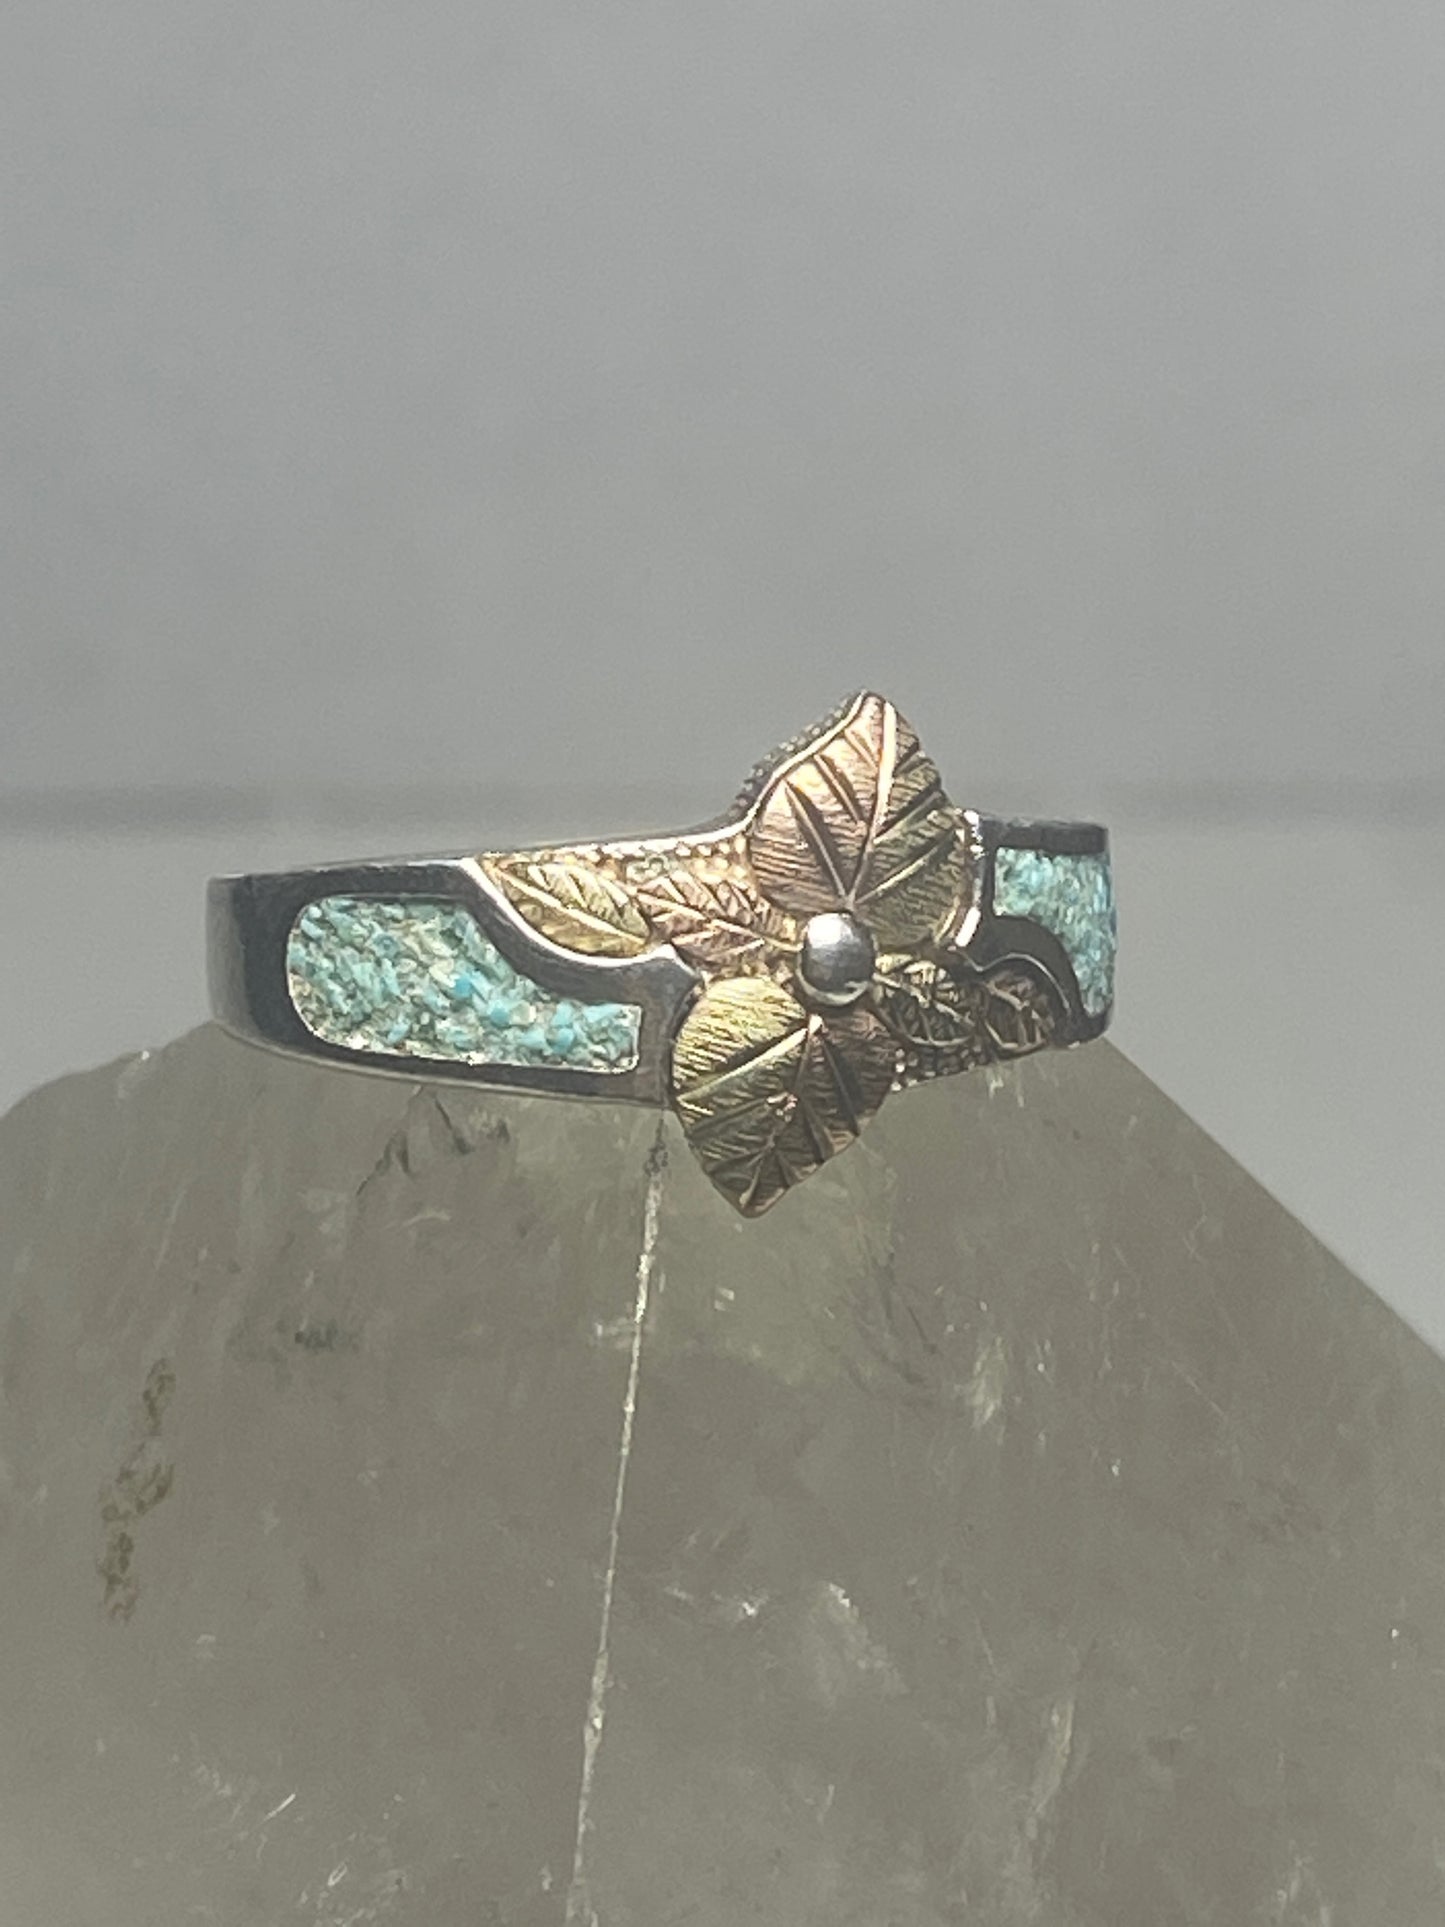 Black Hills Gold ring floral turquoise chips band sterling silver